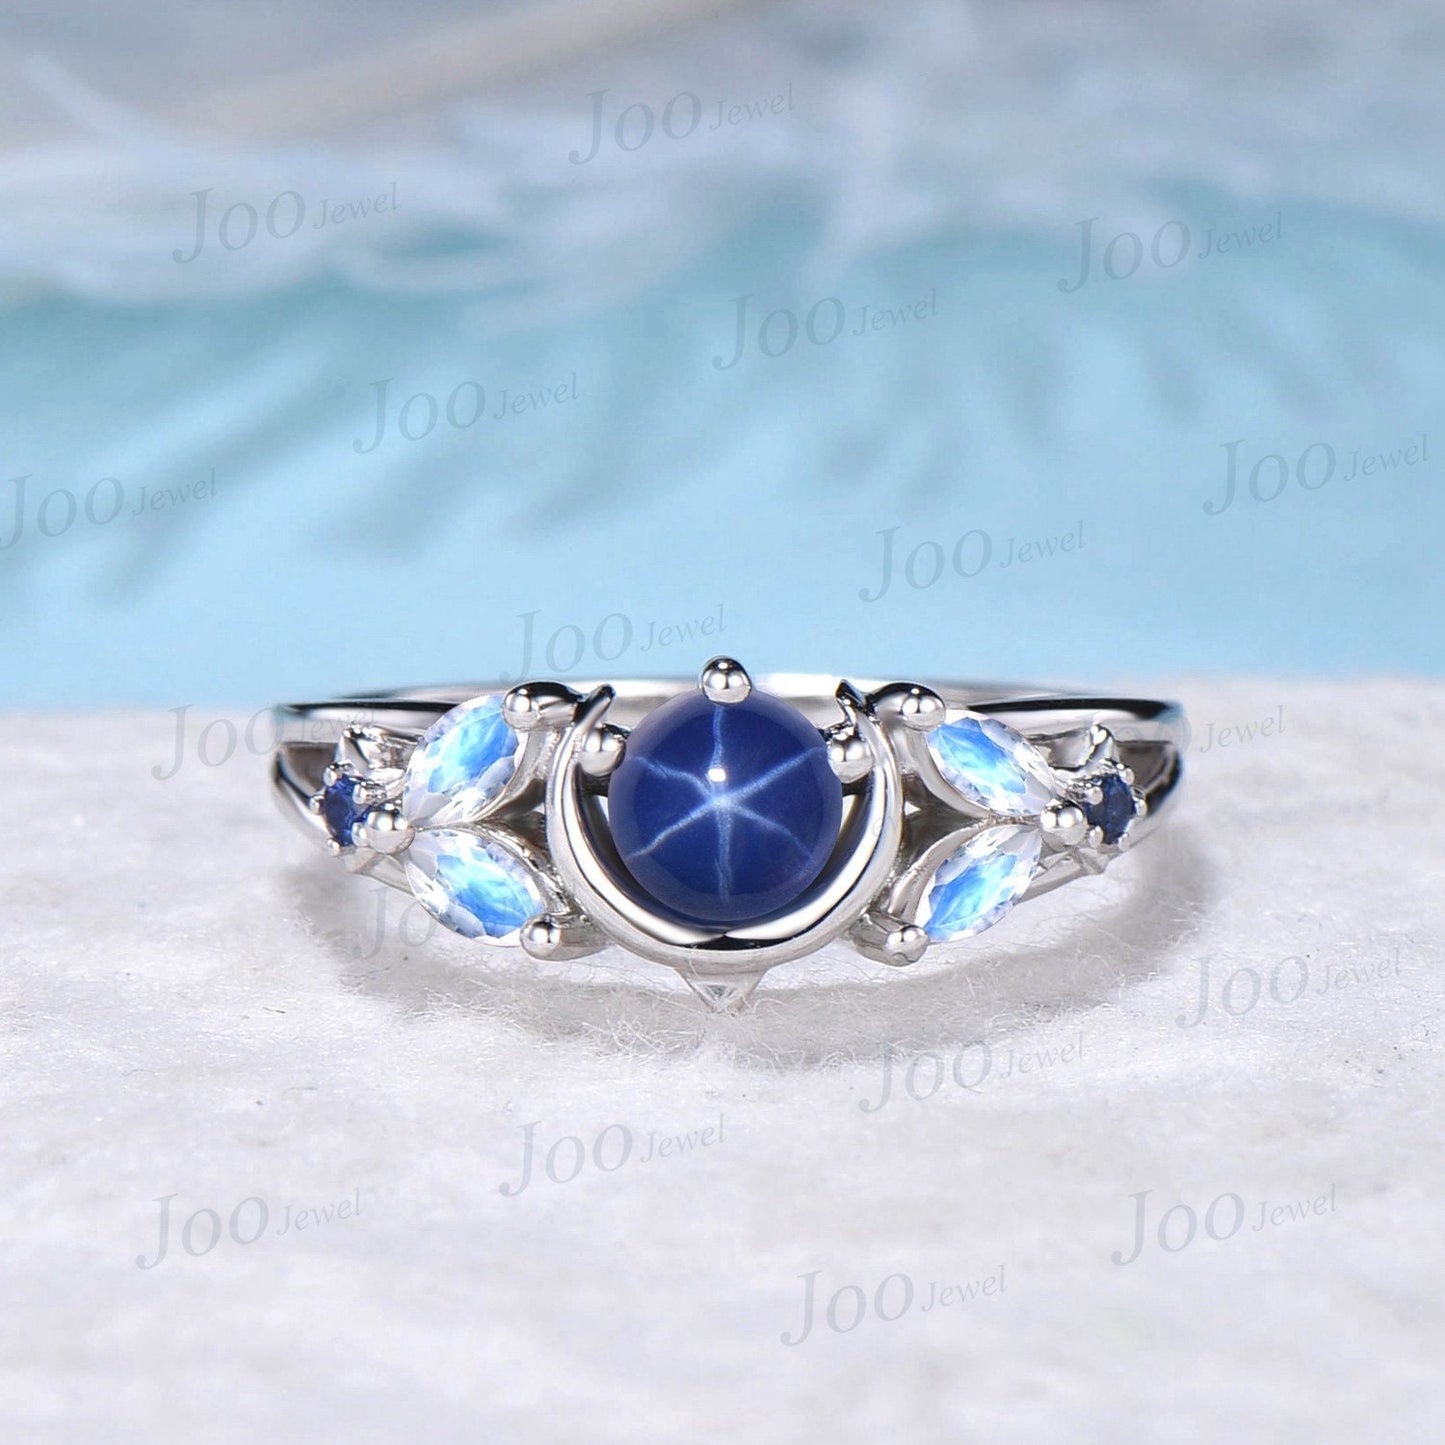 Unique Moon Star Engagement Rings Starry Sky Blue Sandstone Ring Sterling Silver Moonstone Celestial Wedding Rings Half Moon Sapphire Ring